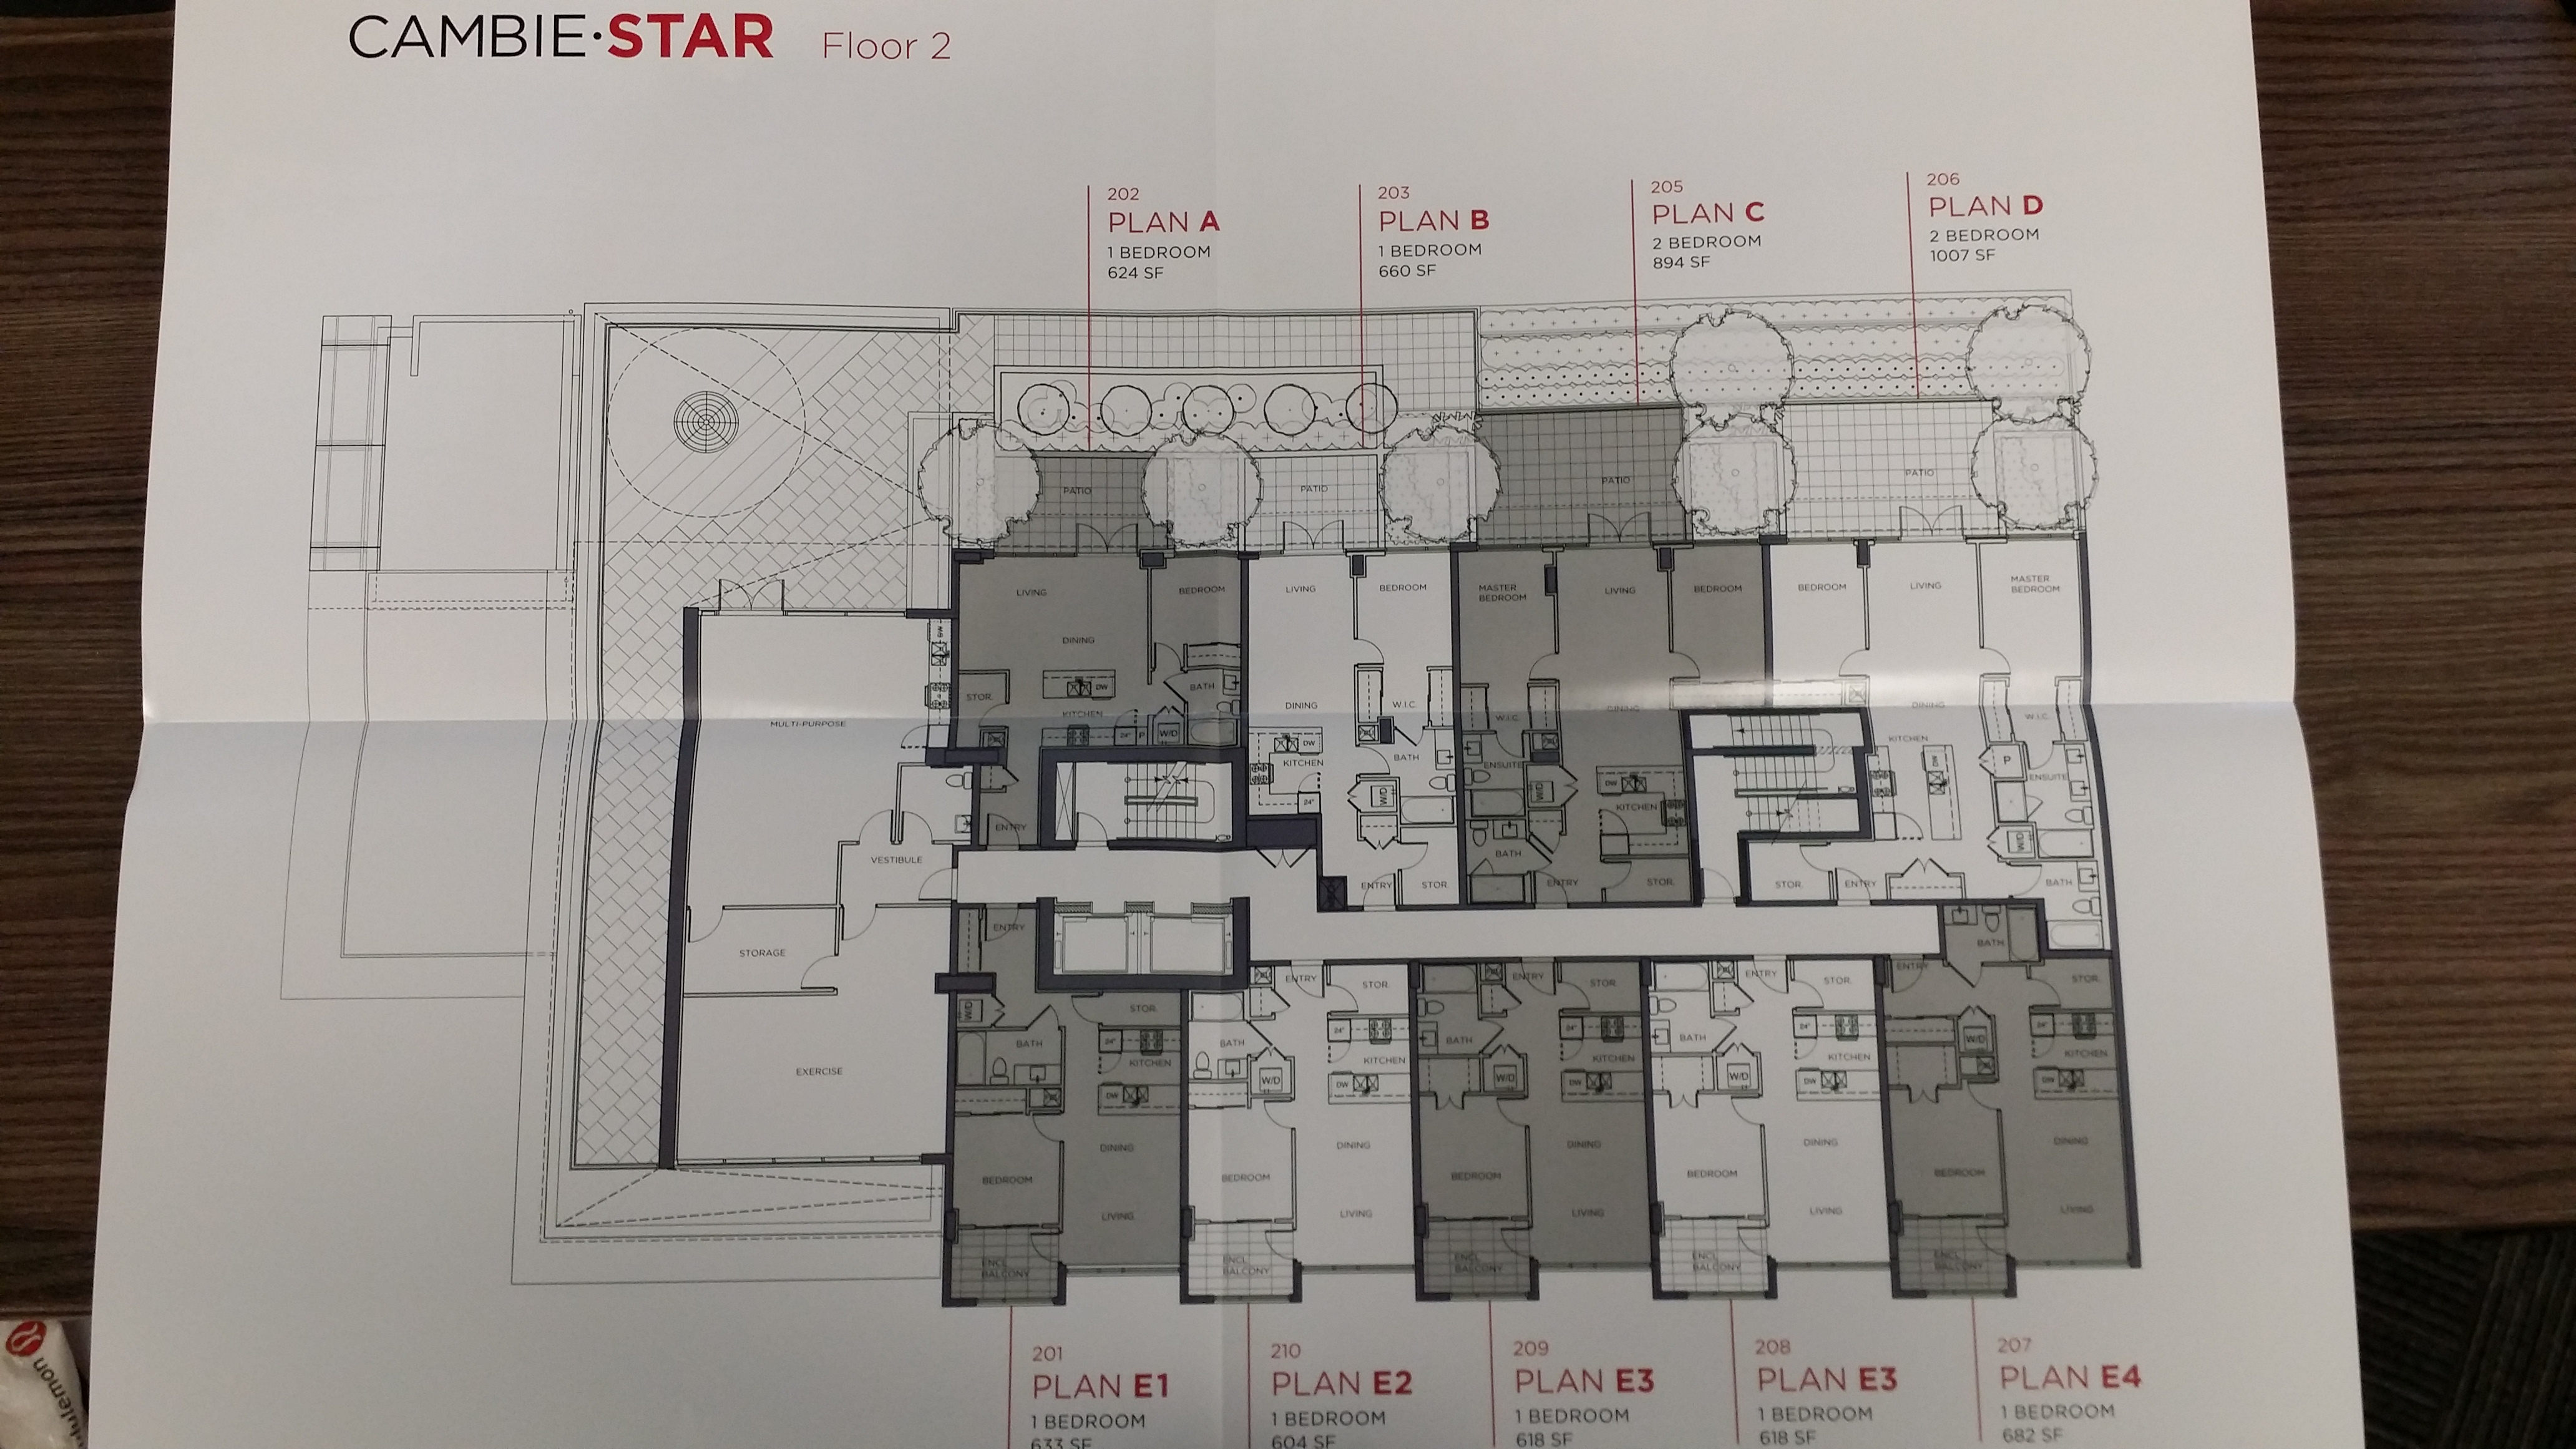 Cambie Star 2nd Floor Plans